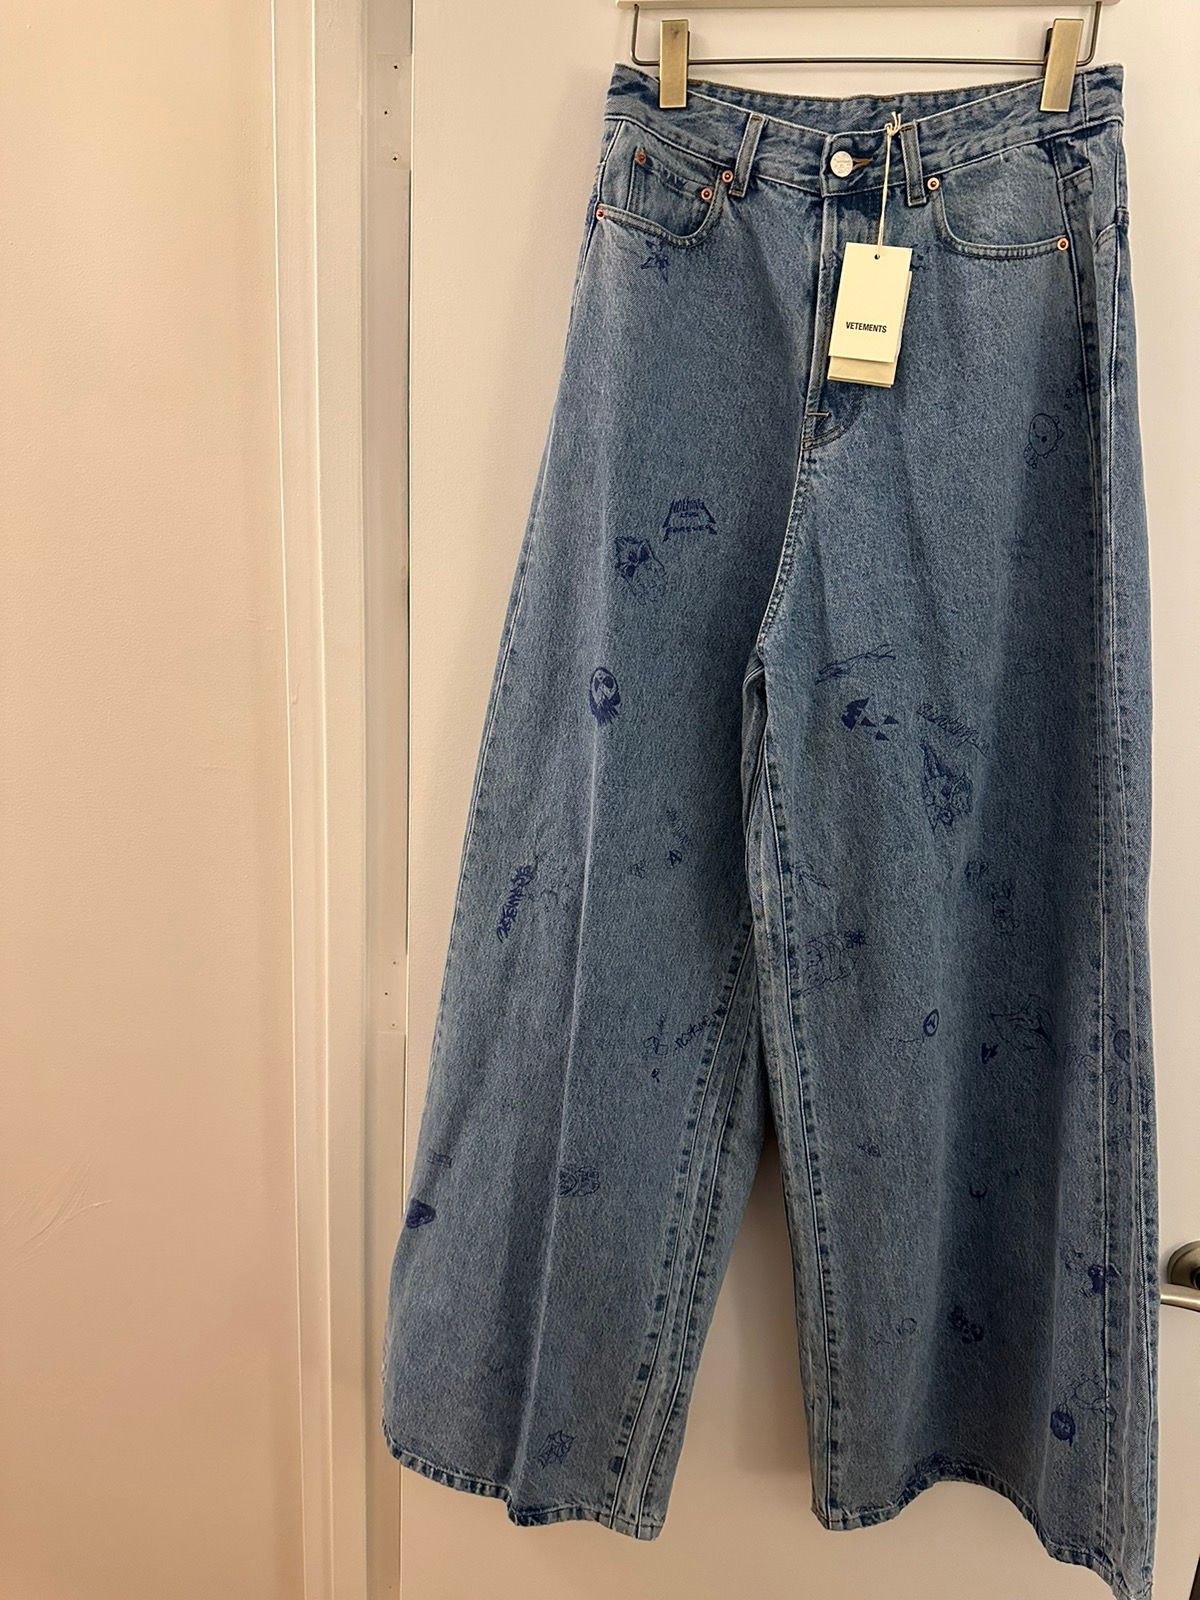 Scribble Baggy Jeans, size 30